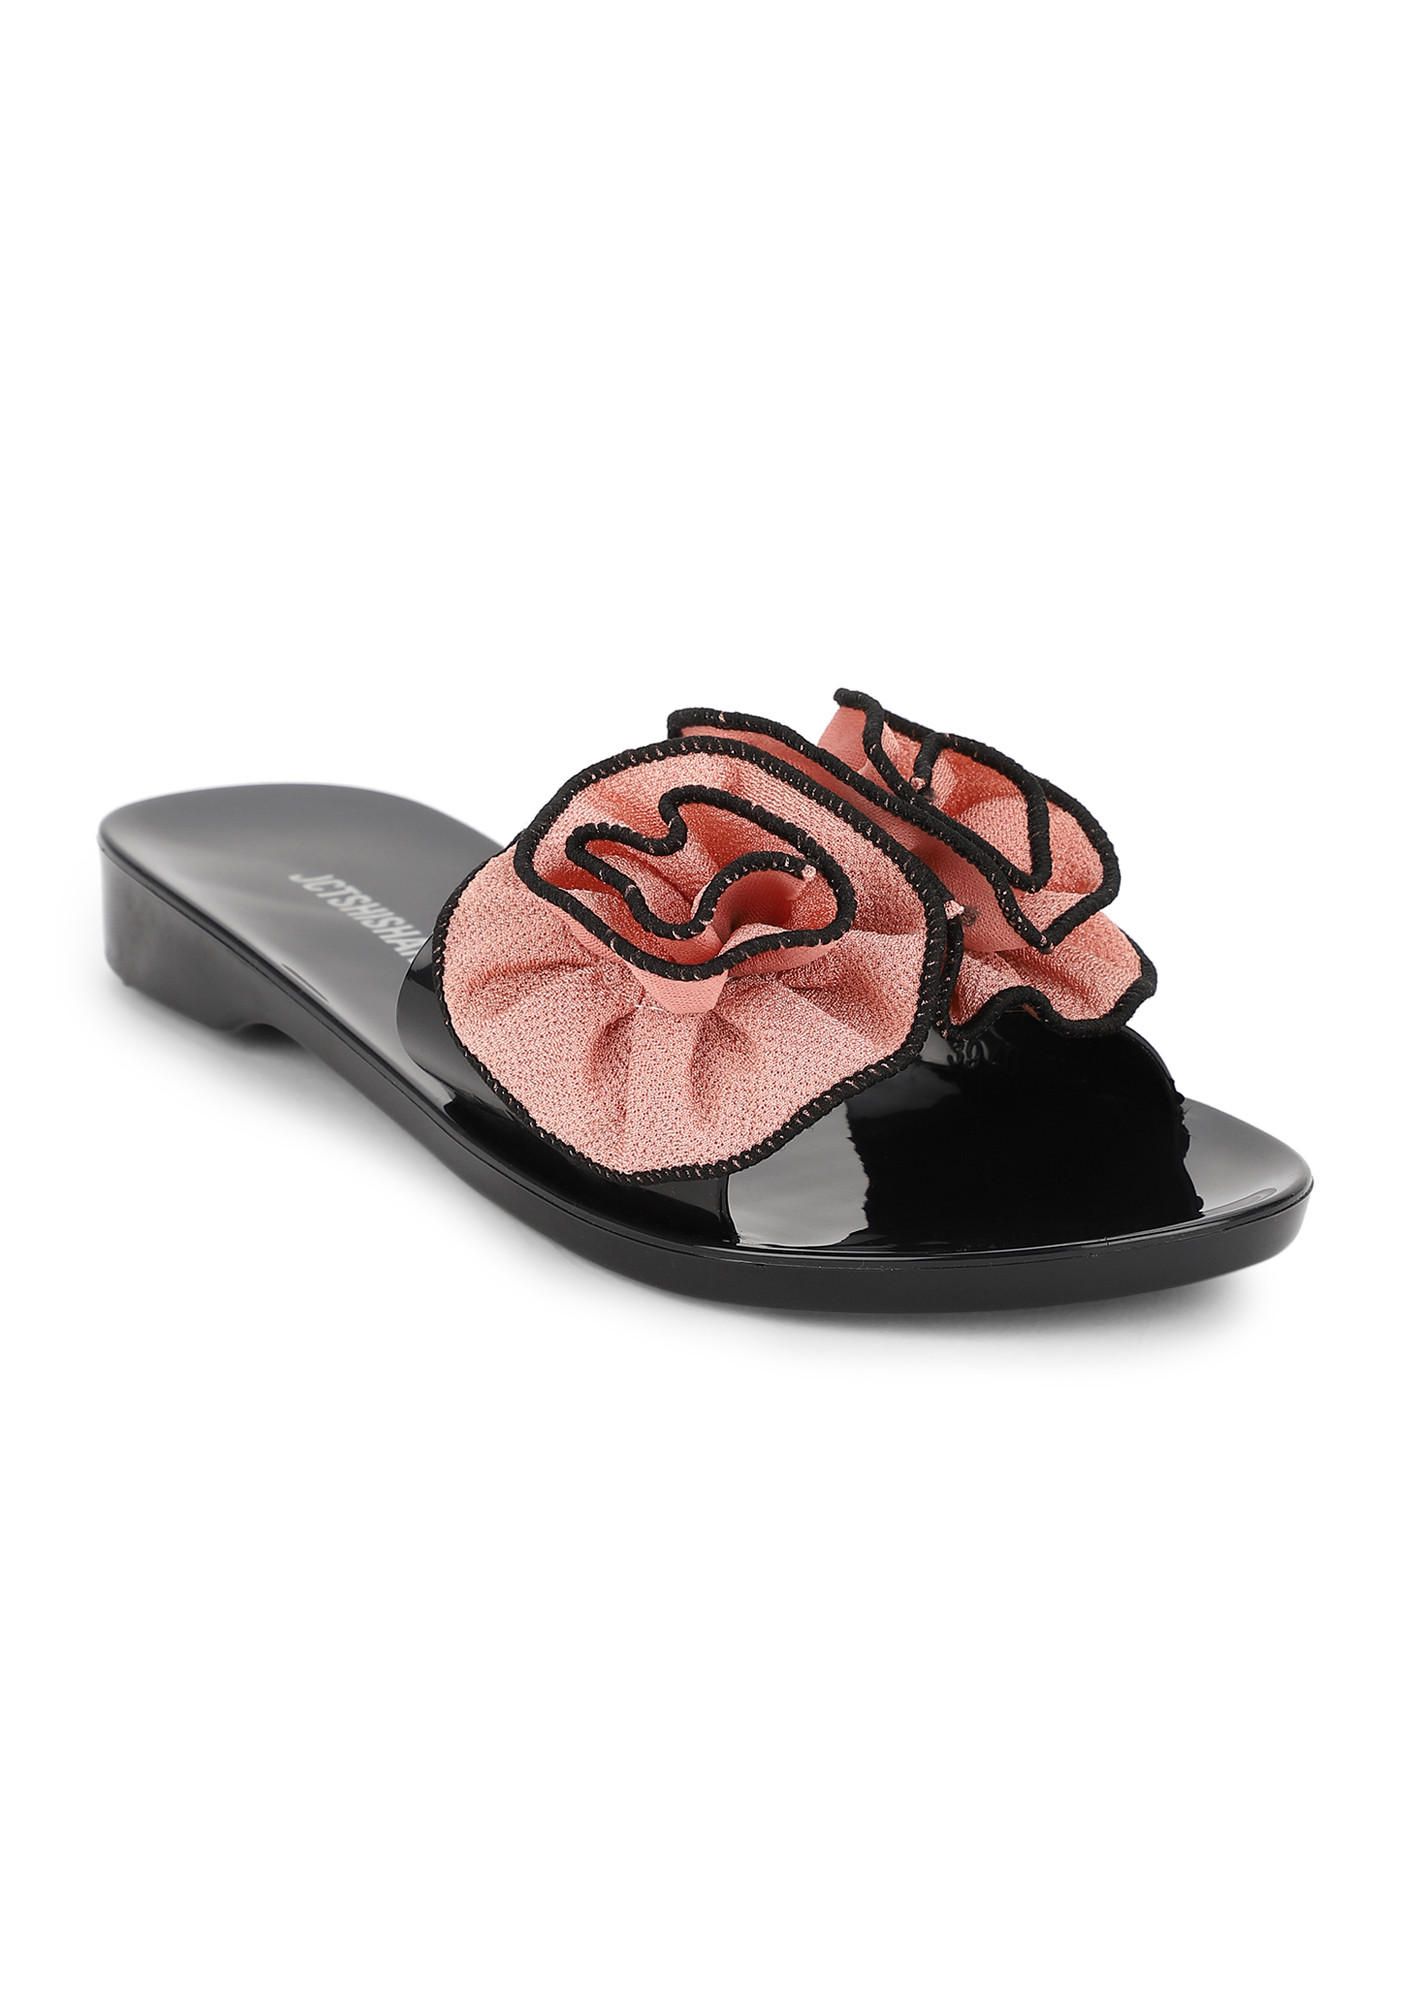 EASY WAY TO STAY GROUNDED PINK SLIDERS